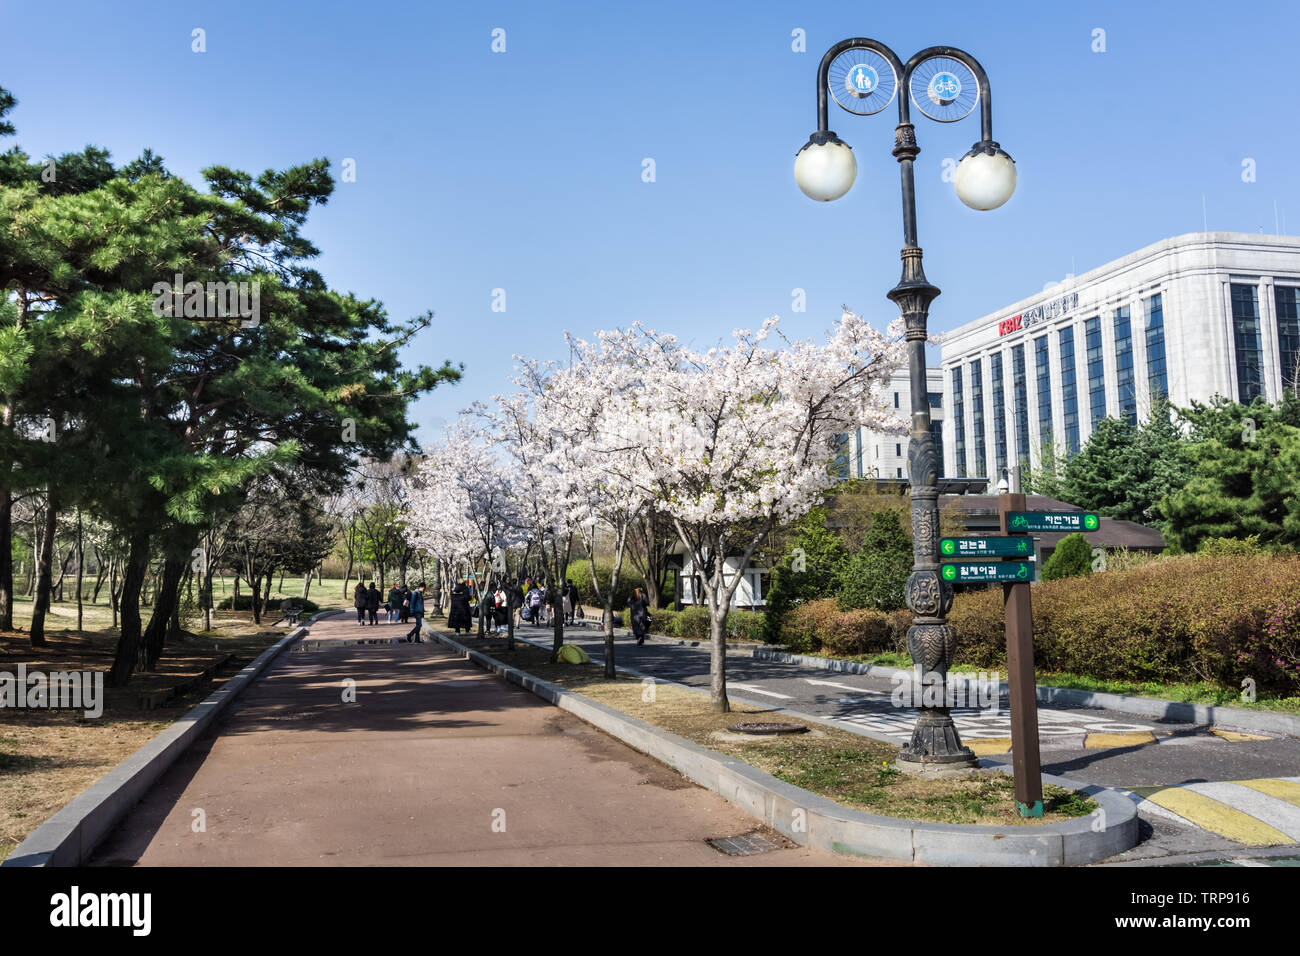 Seoul, South Korea - April 11, 2018: Cherry blossom in Yeouido Park. It is a large recreational area located on Yeouido Island in the central part of Stock Photo